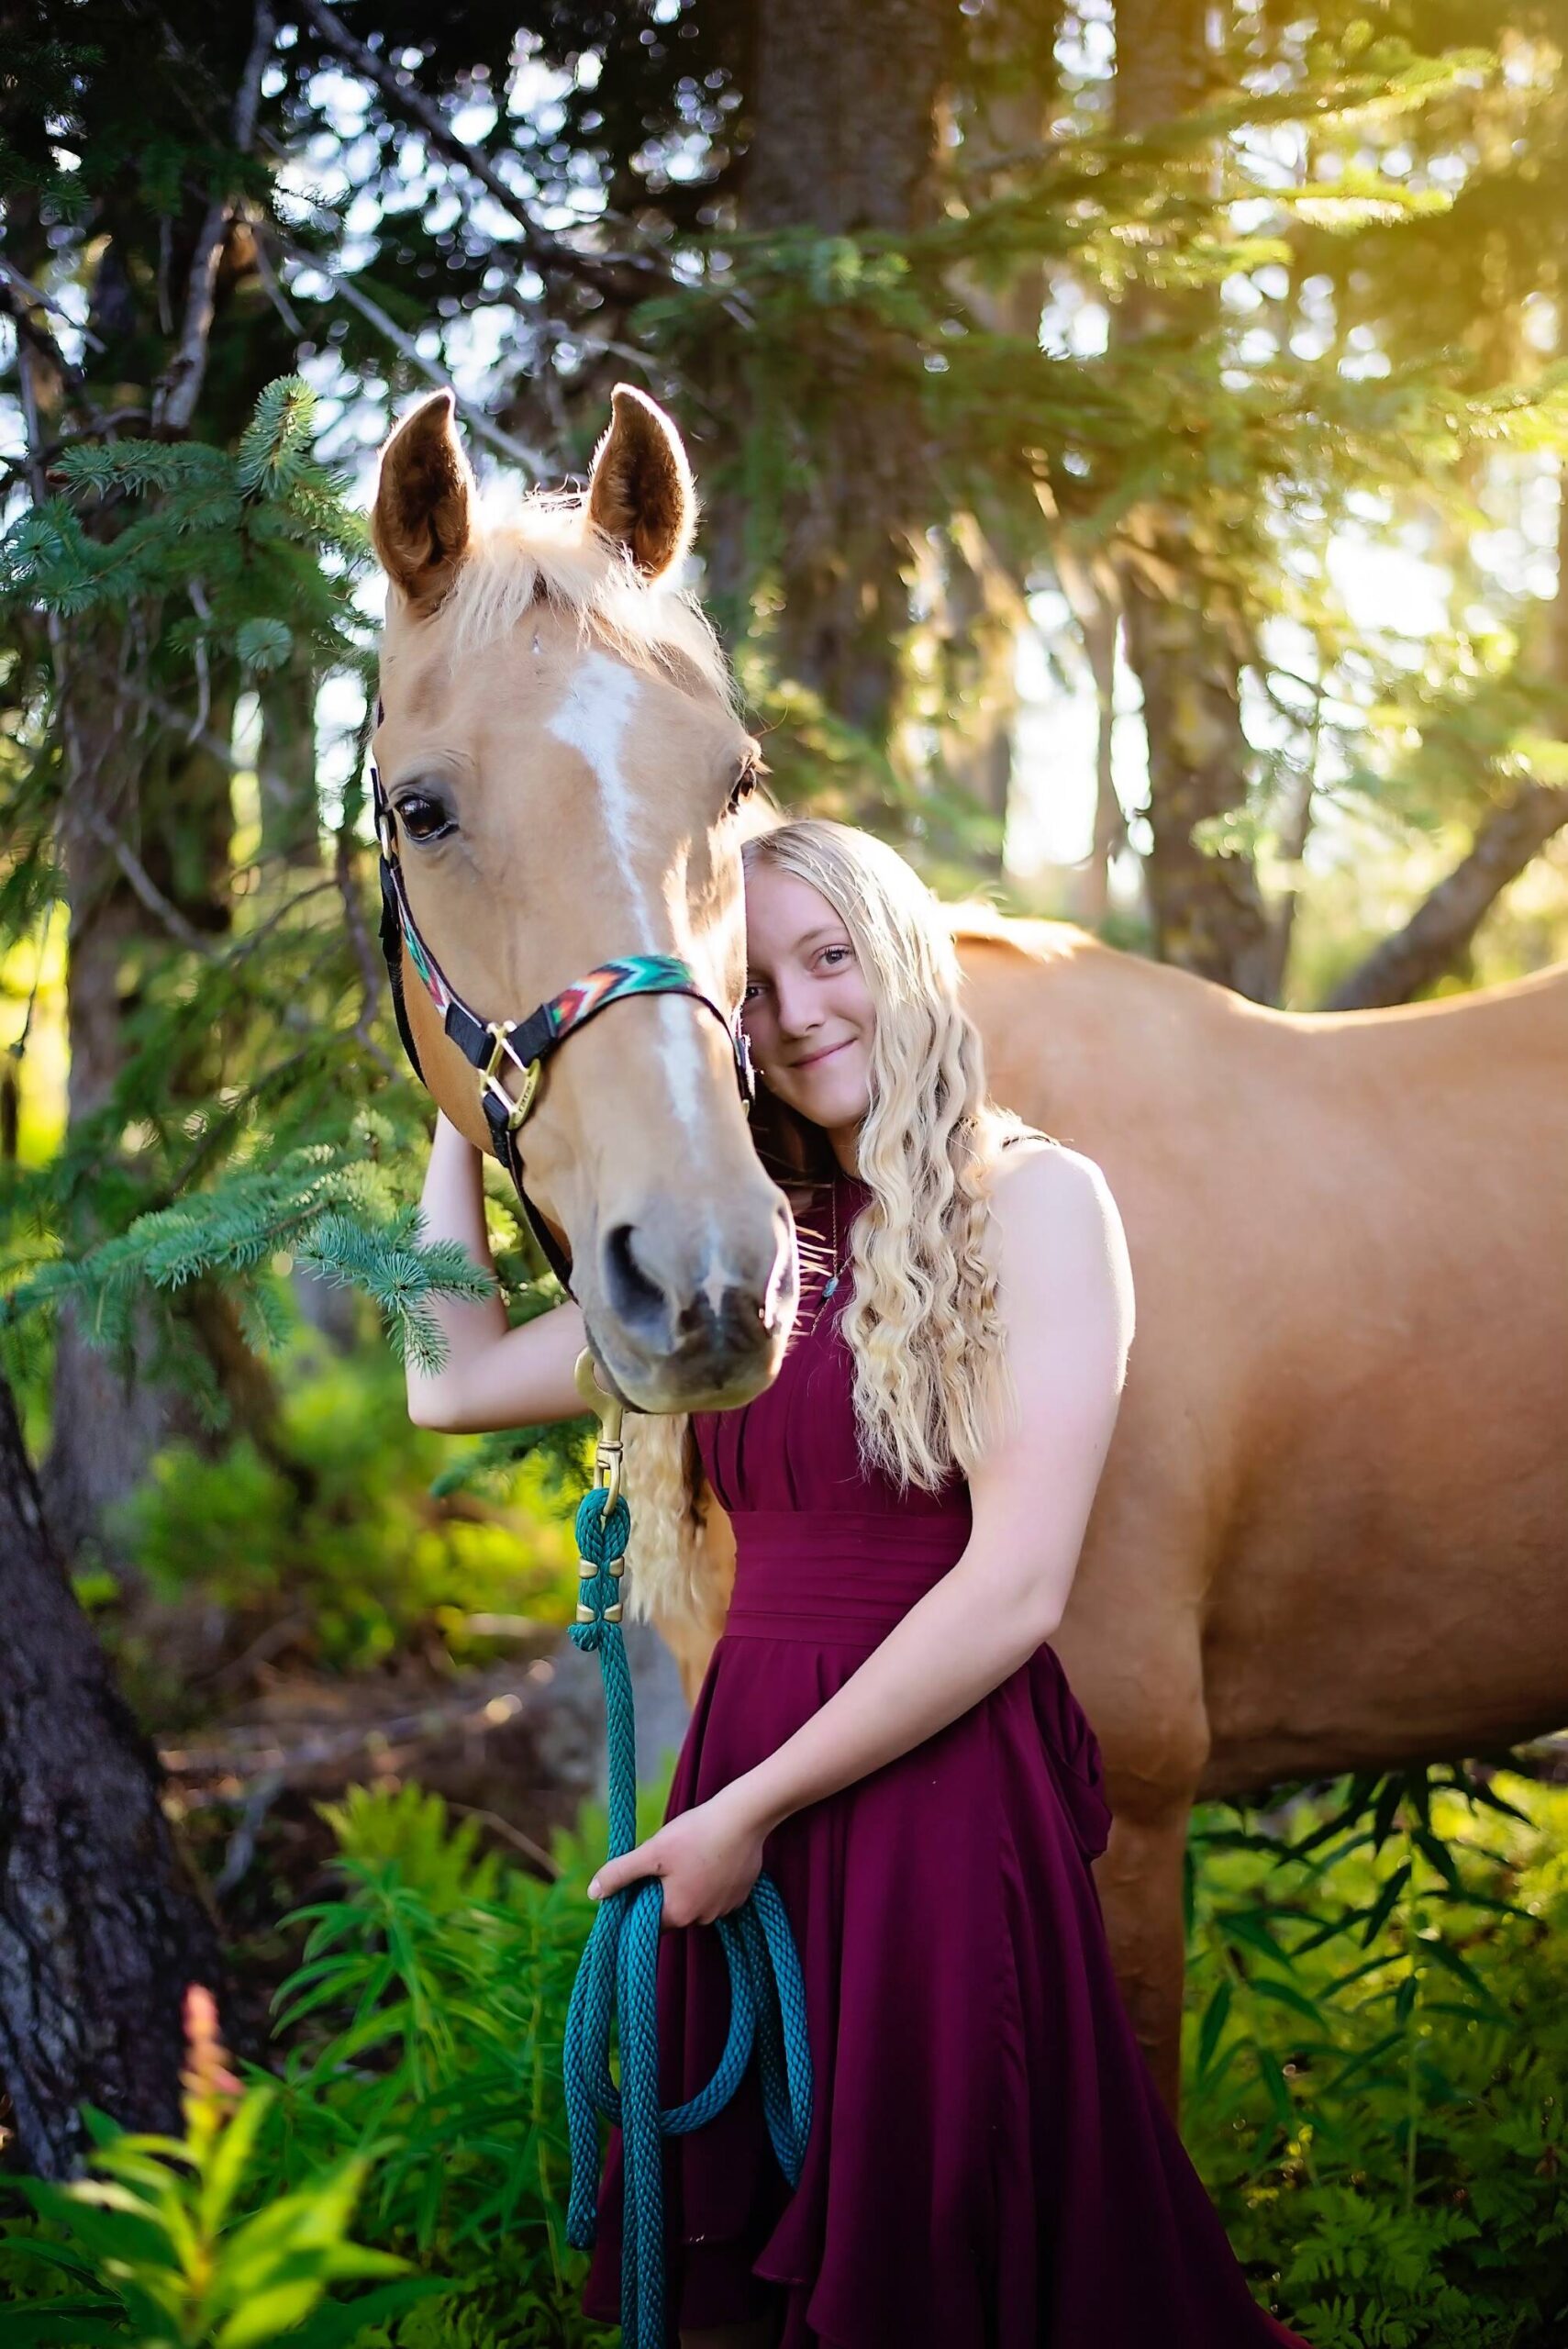 Photo taken by Olivia Honey Photography / courtesy 
Jordan Barrowcliff and her horse Whisper are seen in this senior portrait 2022. Barrowcliff is the 2023 Haven House Women of Distinction “Young Woman of Distinction” award recipient.